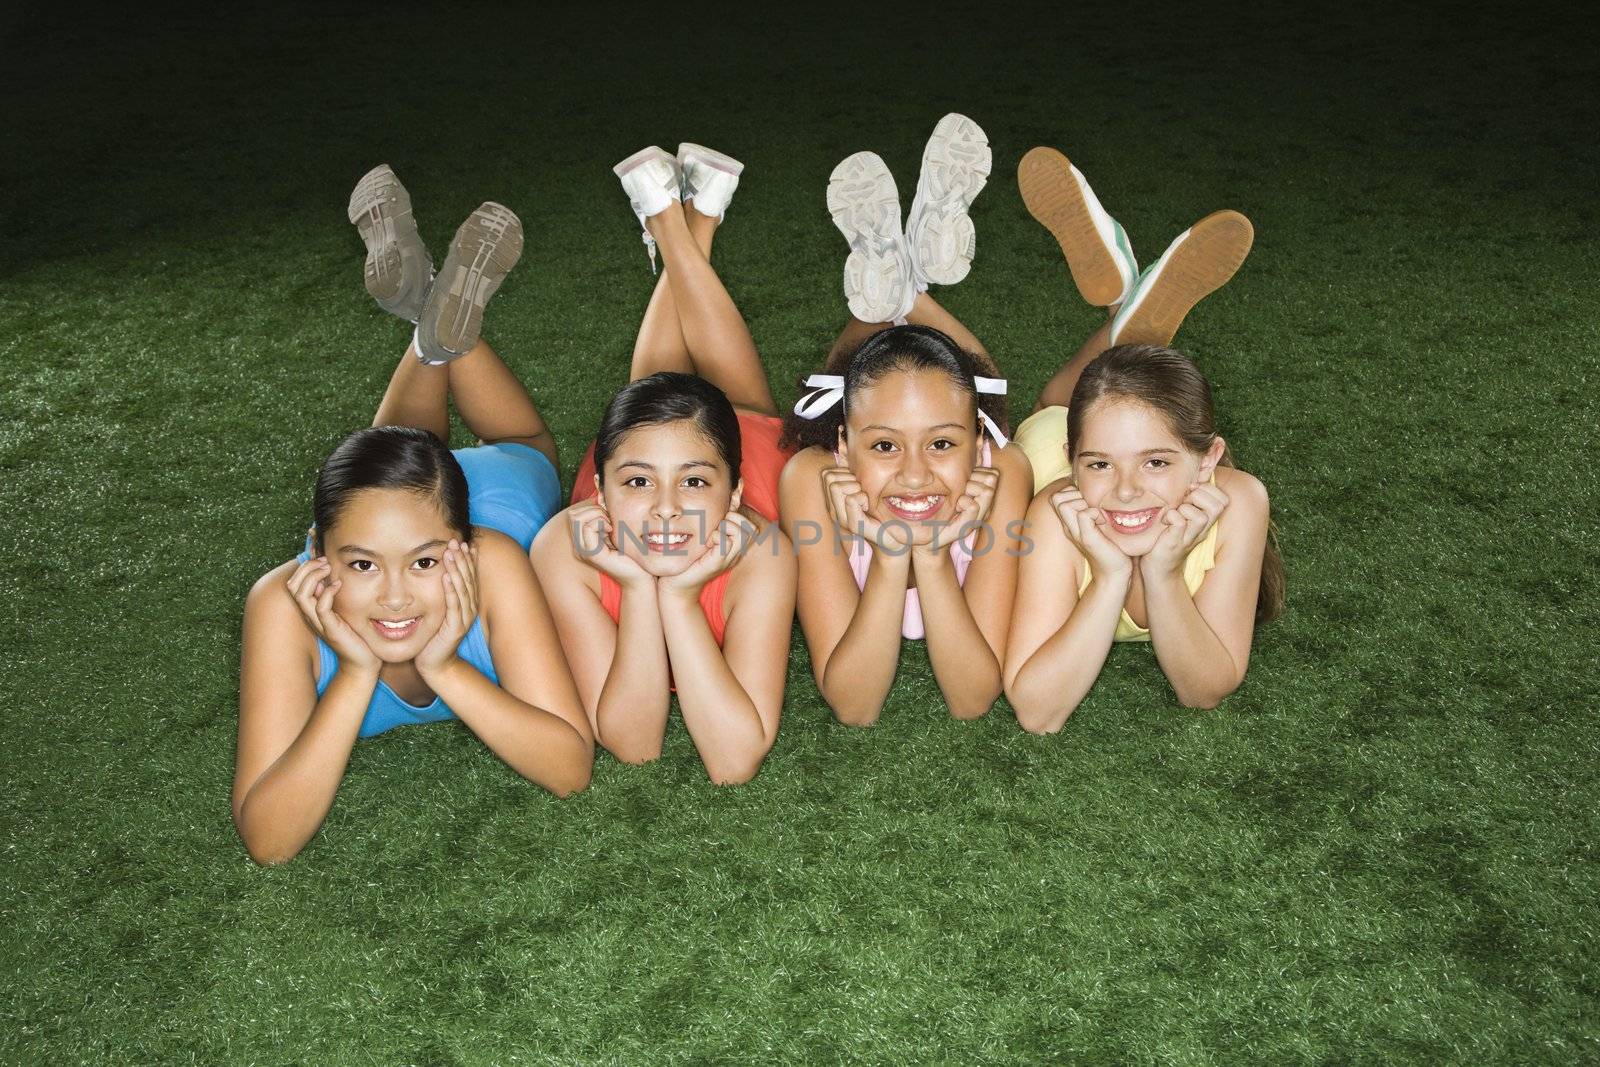 Four multiethnic girls lying on ground in indoor gym with heads on hands smiling.